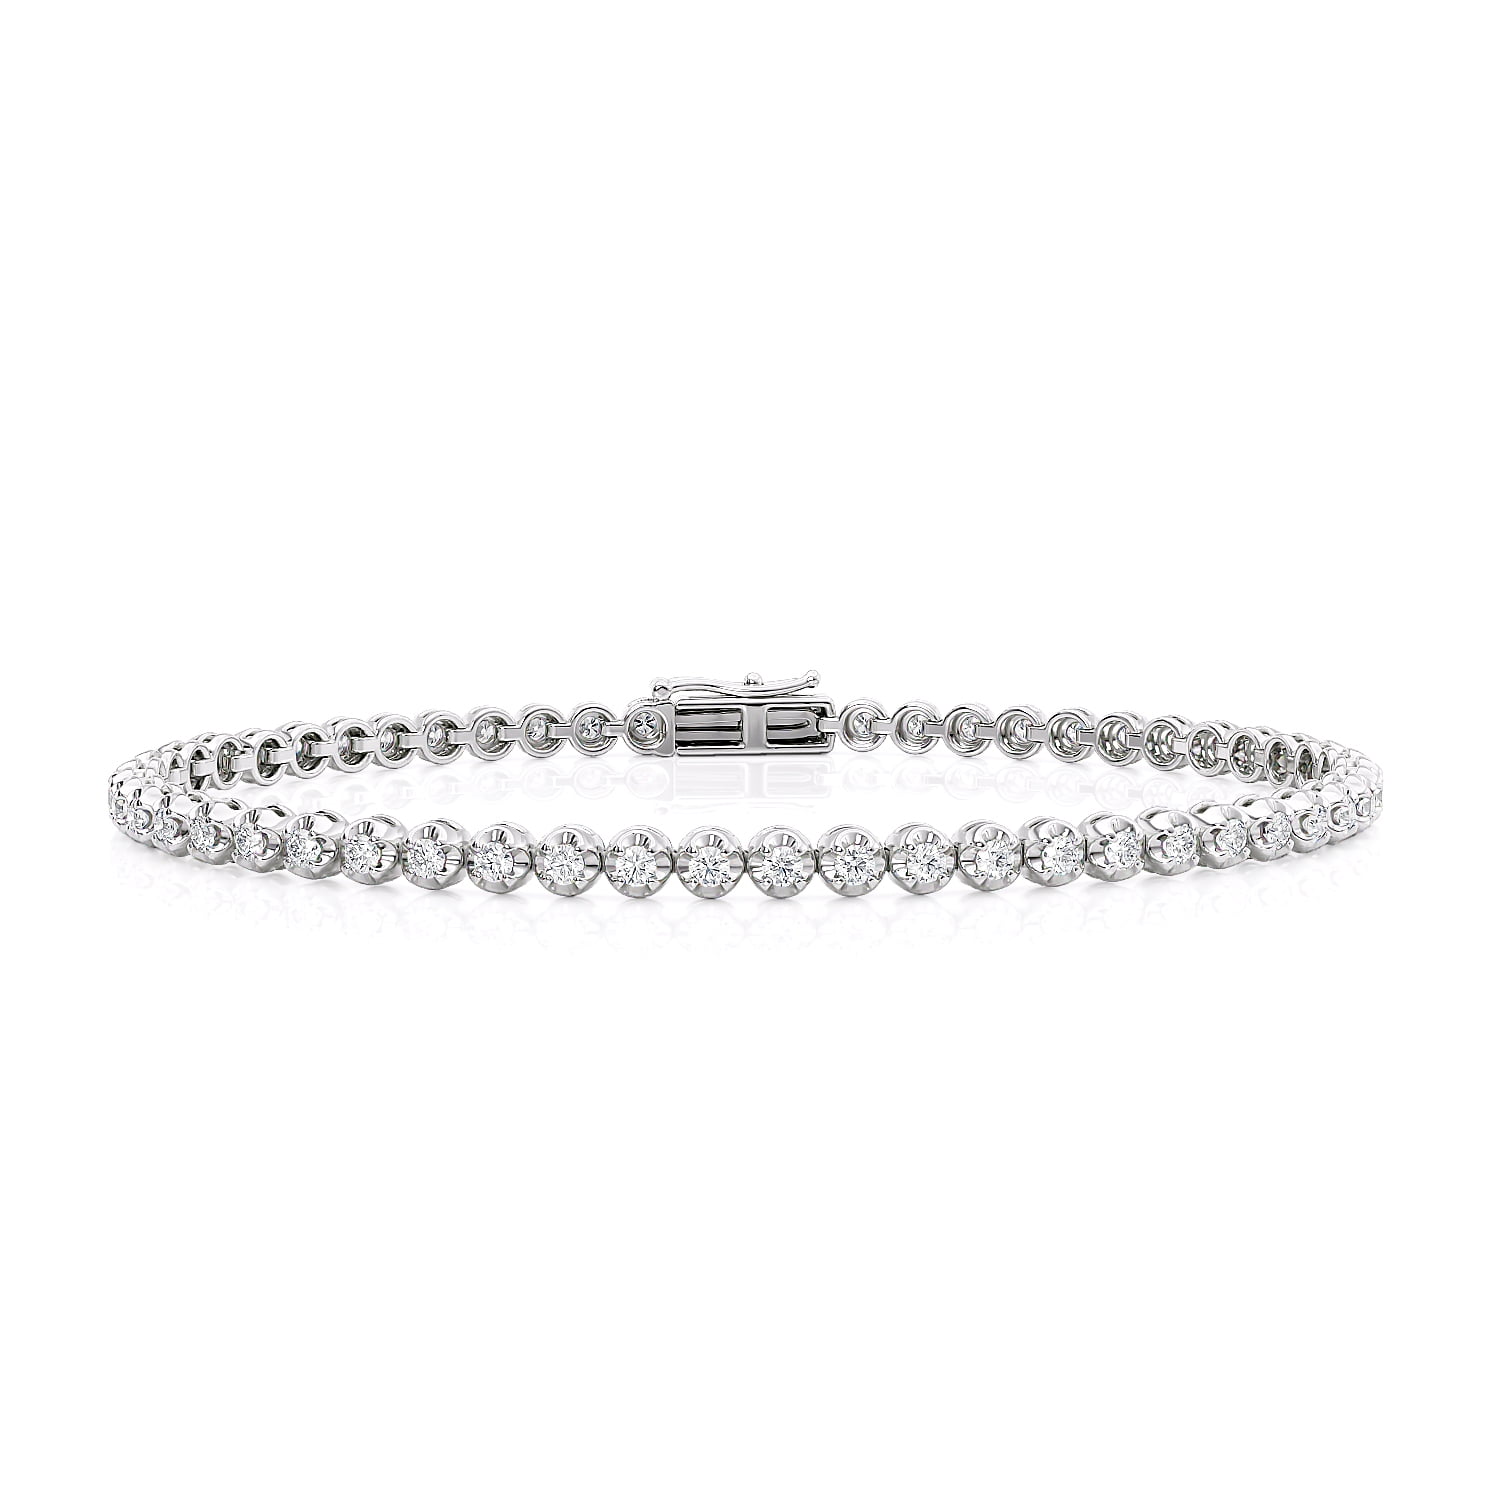 Beverly Hills Jewelers 1 Carat Diamond Tennis Bracelet for Women in 10k White Gold with Secure